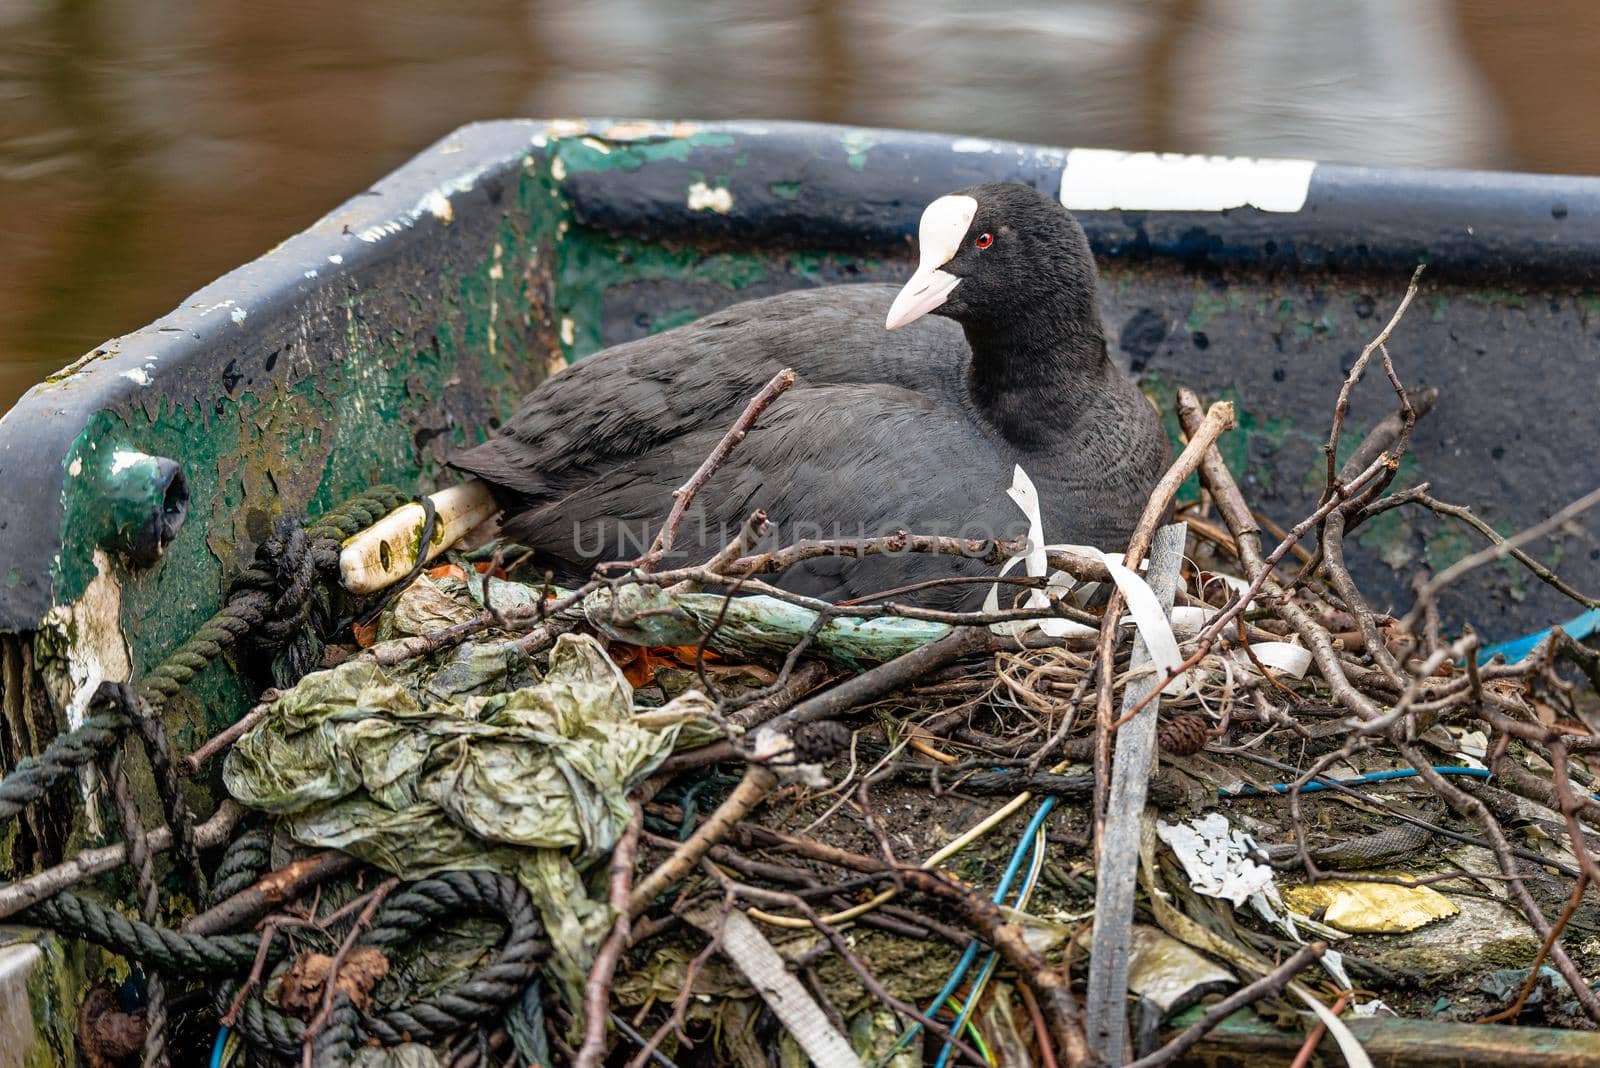 Eurasian Coot, Fulica atra, nest on an abandoned boat, Amsterdam canal by Pendleton